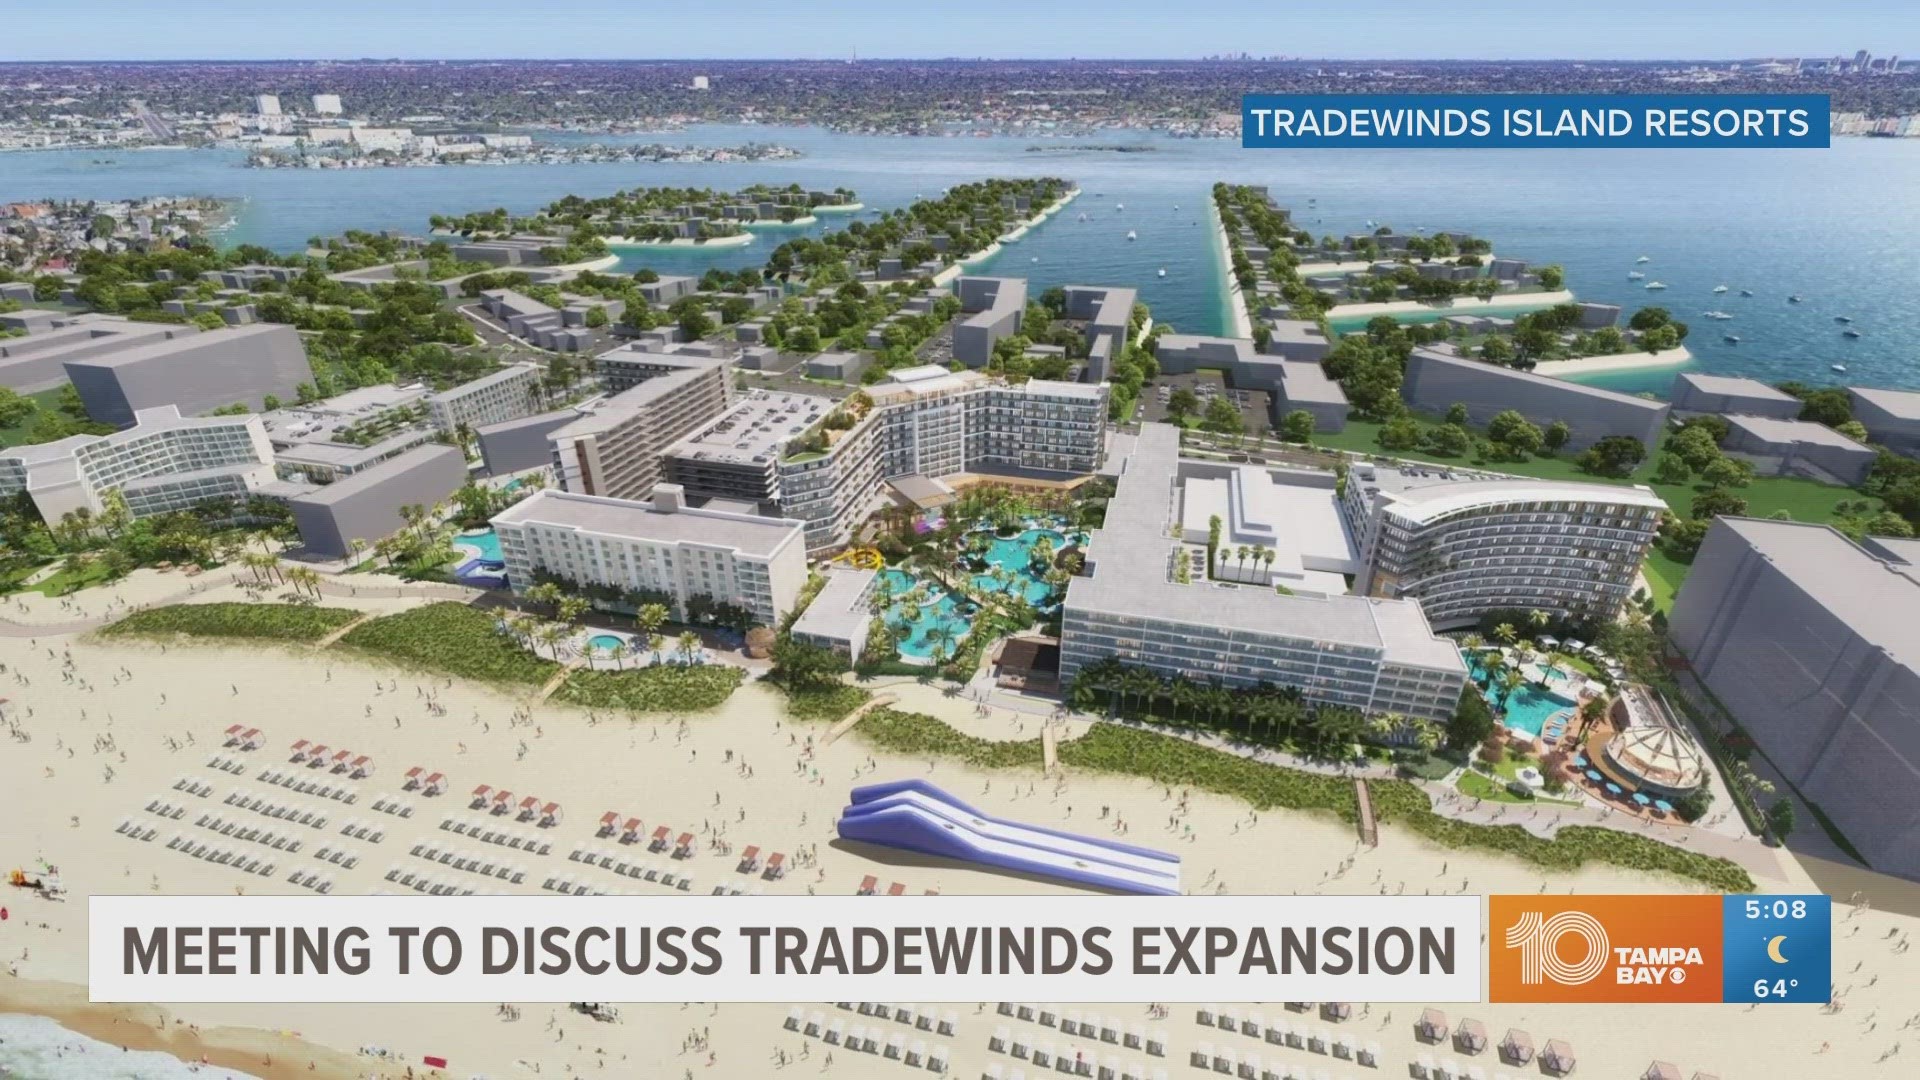 10 Tampa Bay reporter Anjelicia Bruton spoke to developers, who say it will help the local economy, and neighbors, who are worried about the environment and crowding